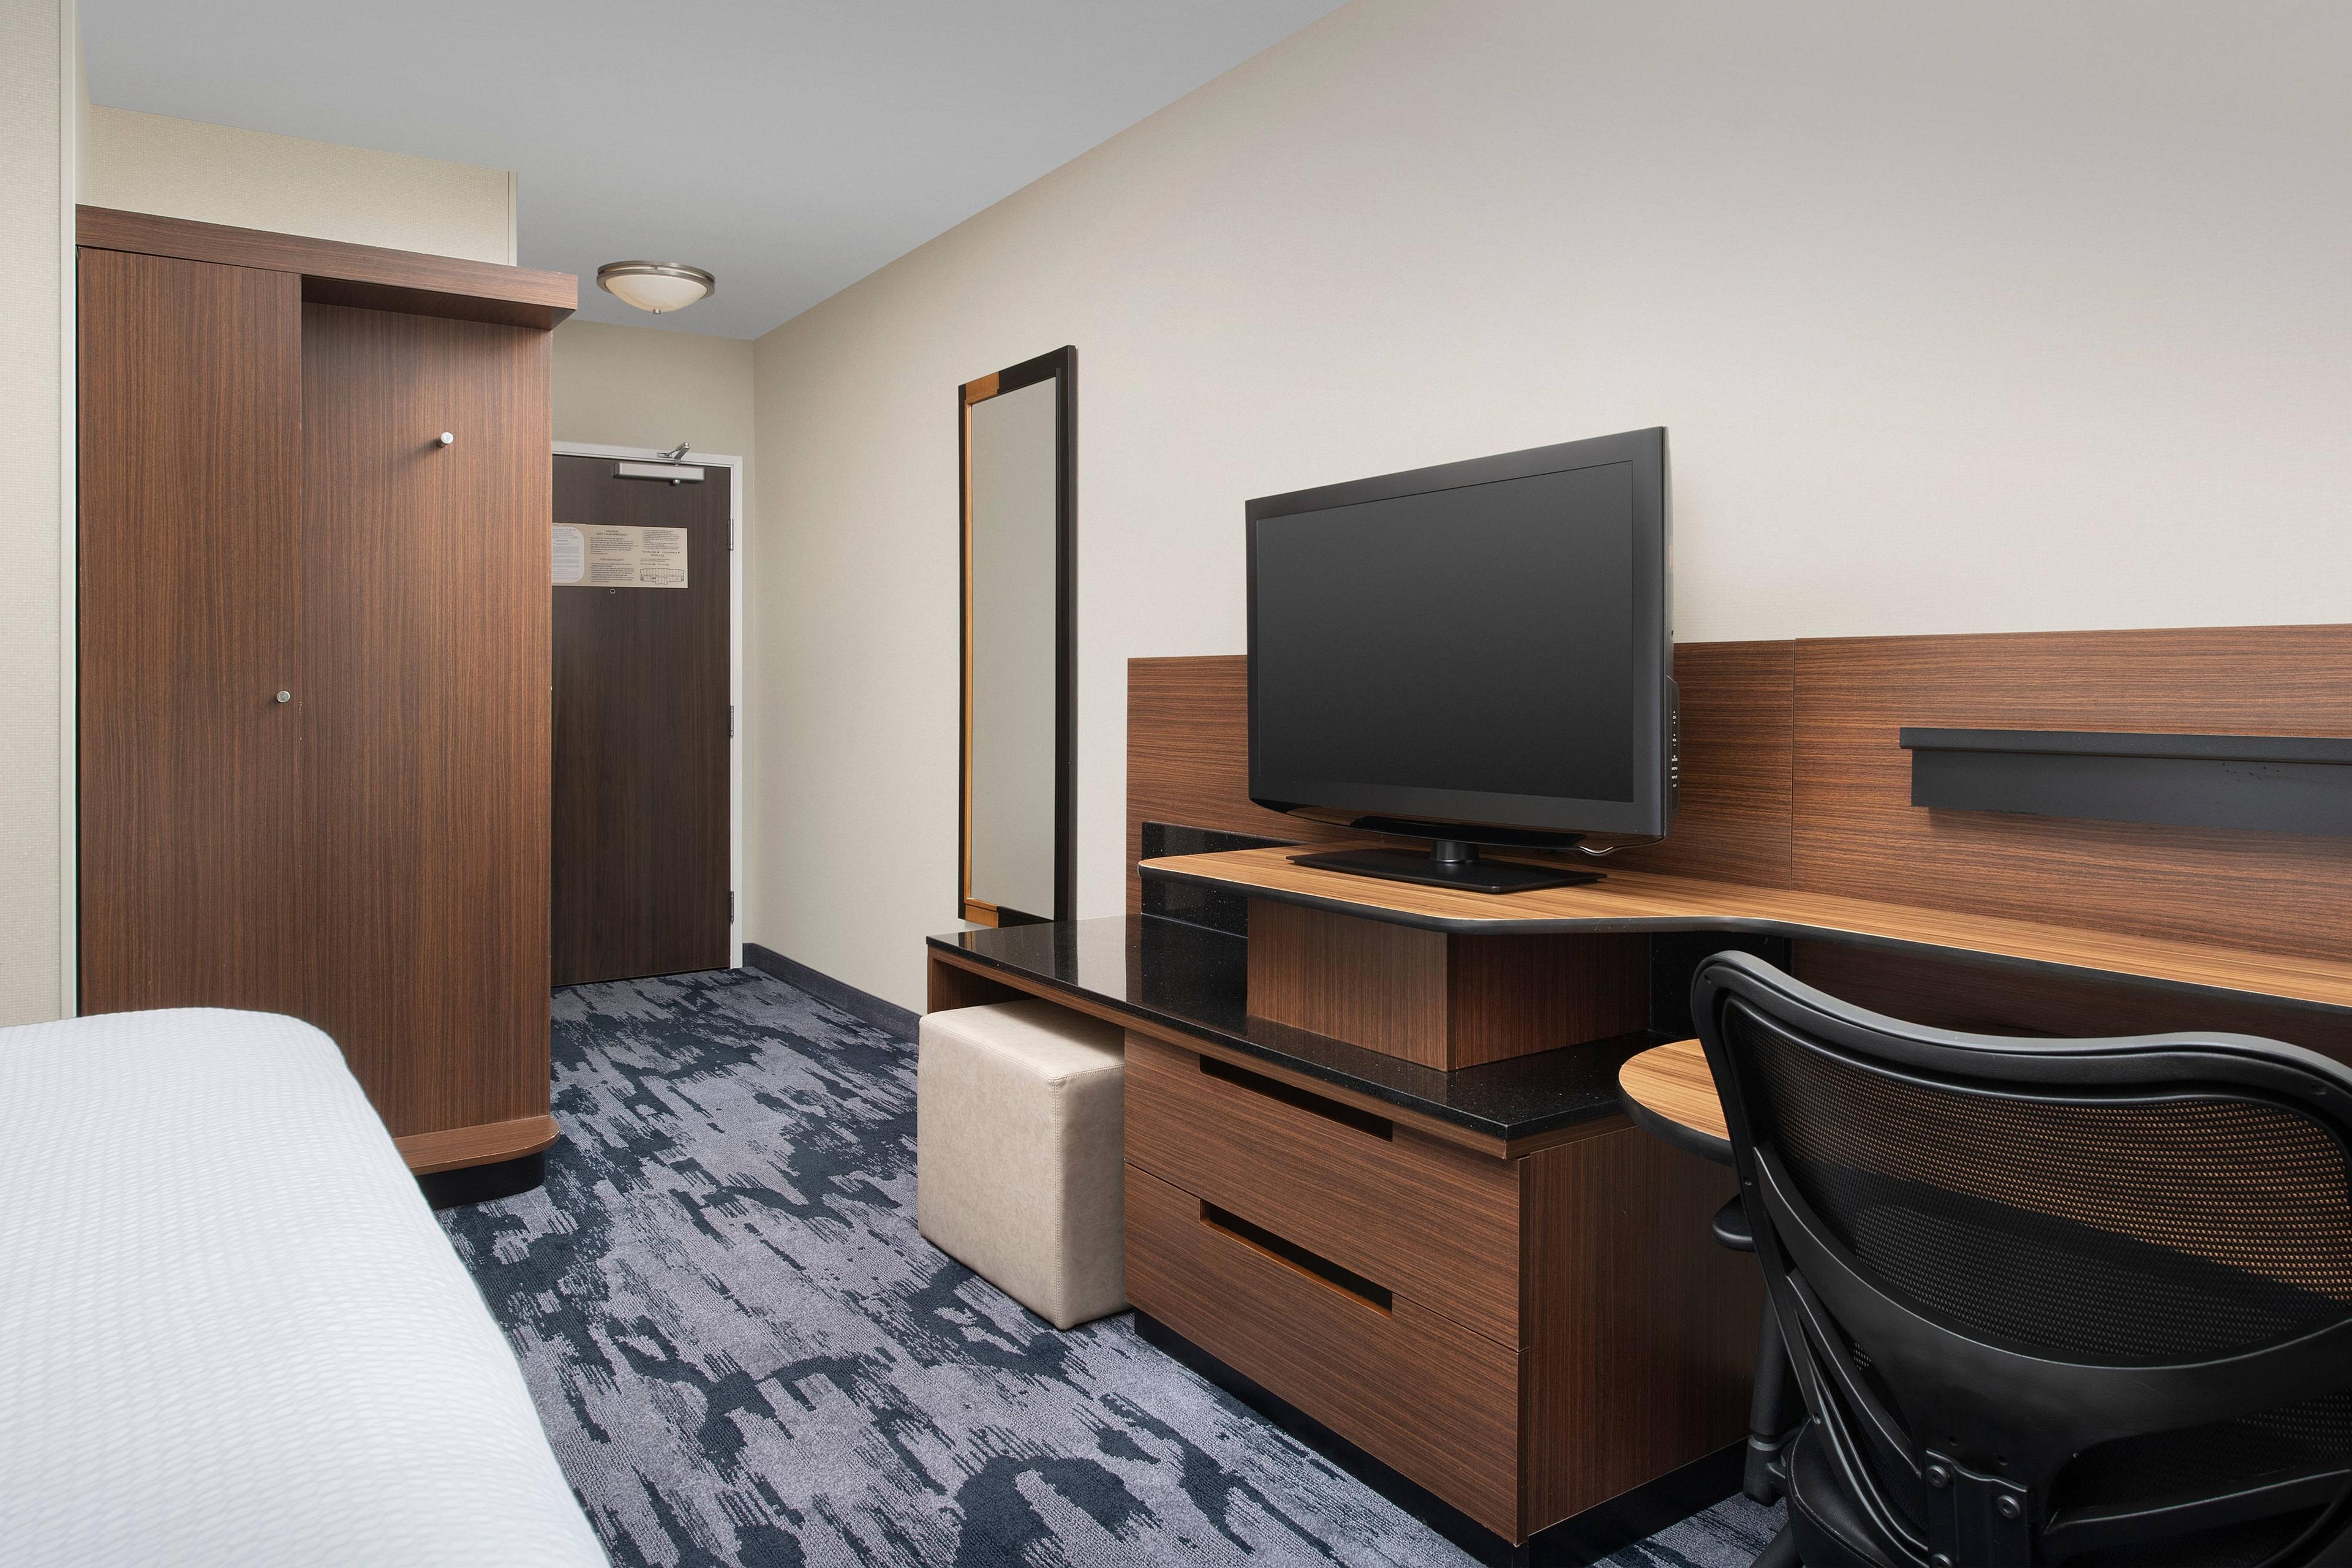 Guests will enjoy our modern accommodations and free WiFi in out guest rooms.